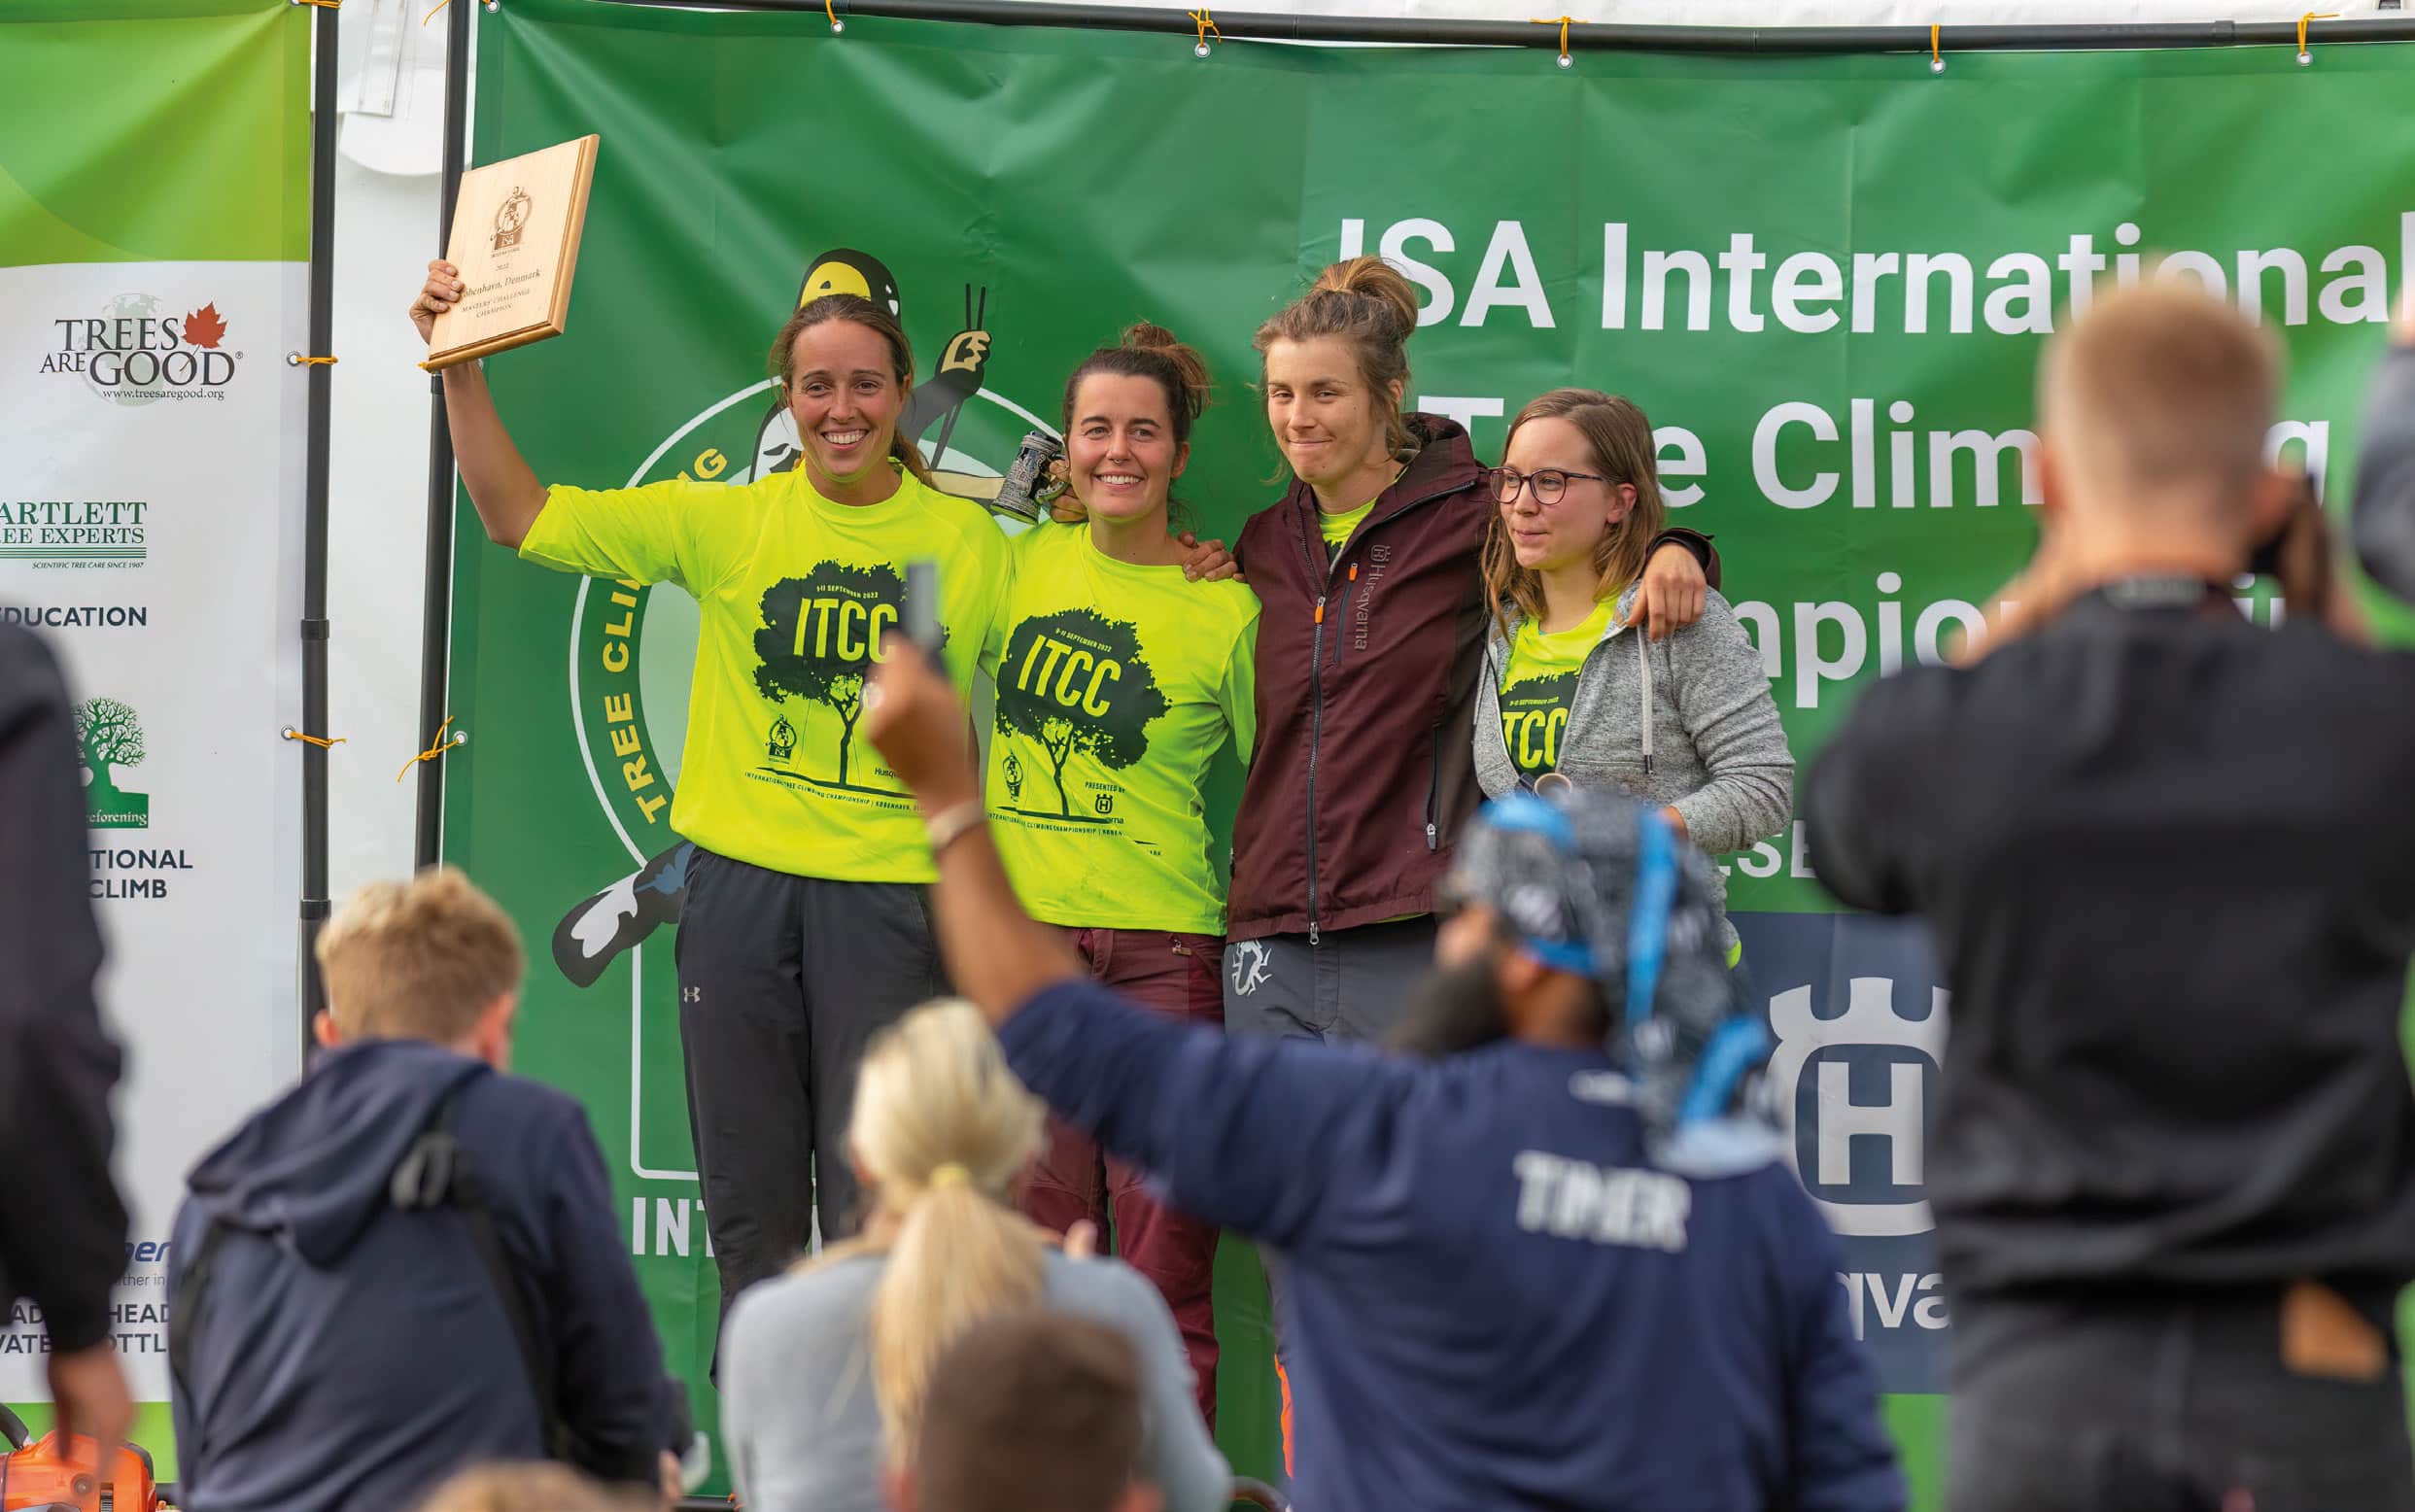 Jo Hedger (left) won the Women’s World title for a fifth time at the ISA International Tree Climbing Competition 2022, held in Copenhagen. (Photo: Megan James)